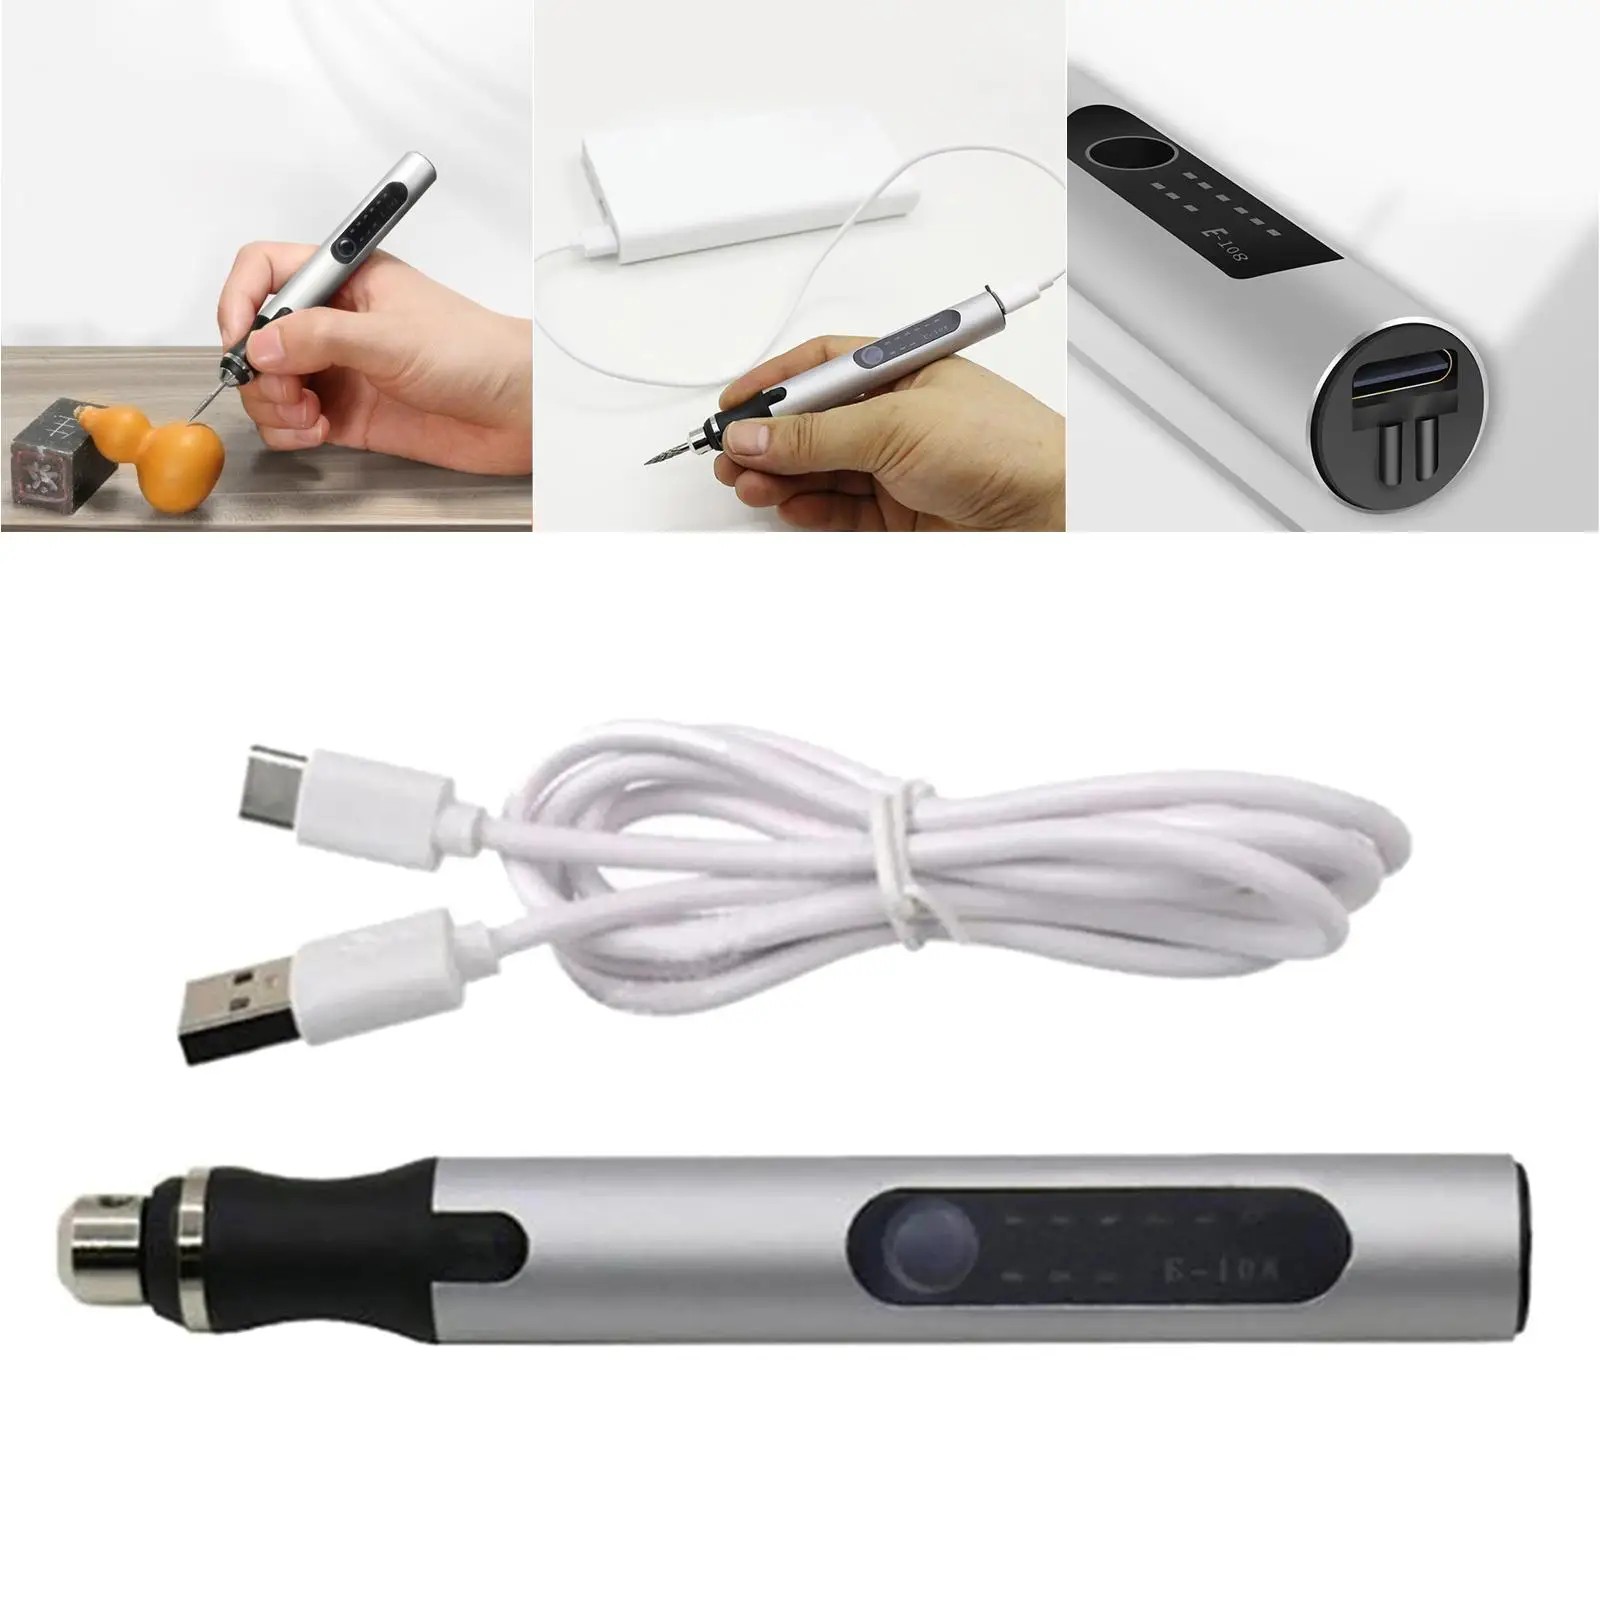 Portable Engraving Pen for Scrapbooking Tools Stationery Diy Engrave Electric Carving Pen Machine Graver Tools